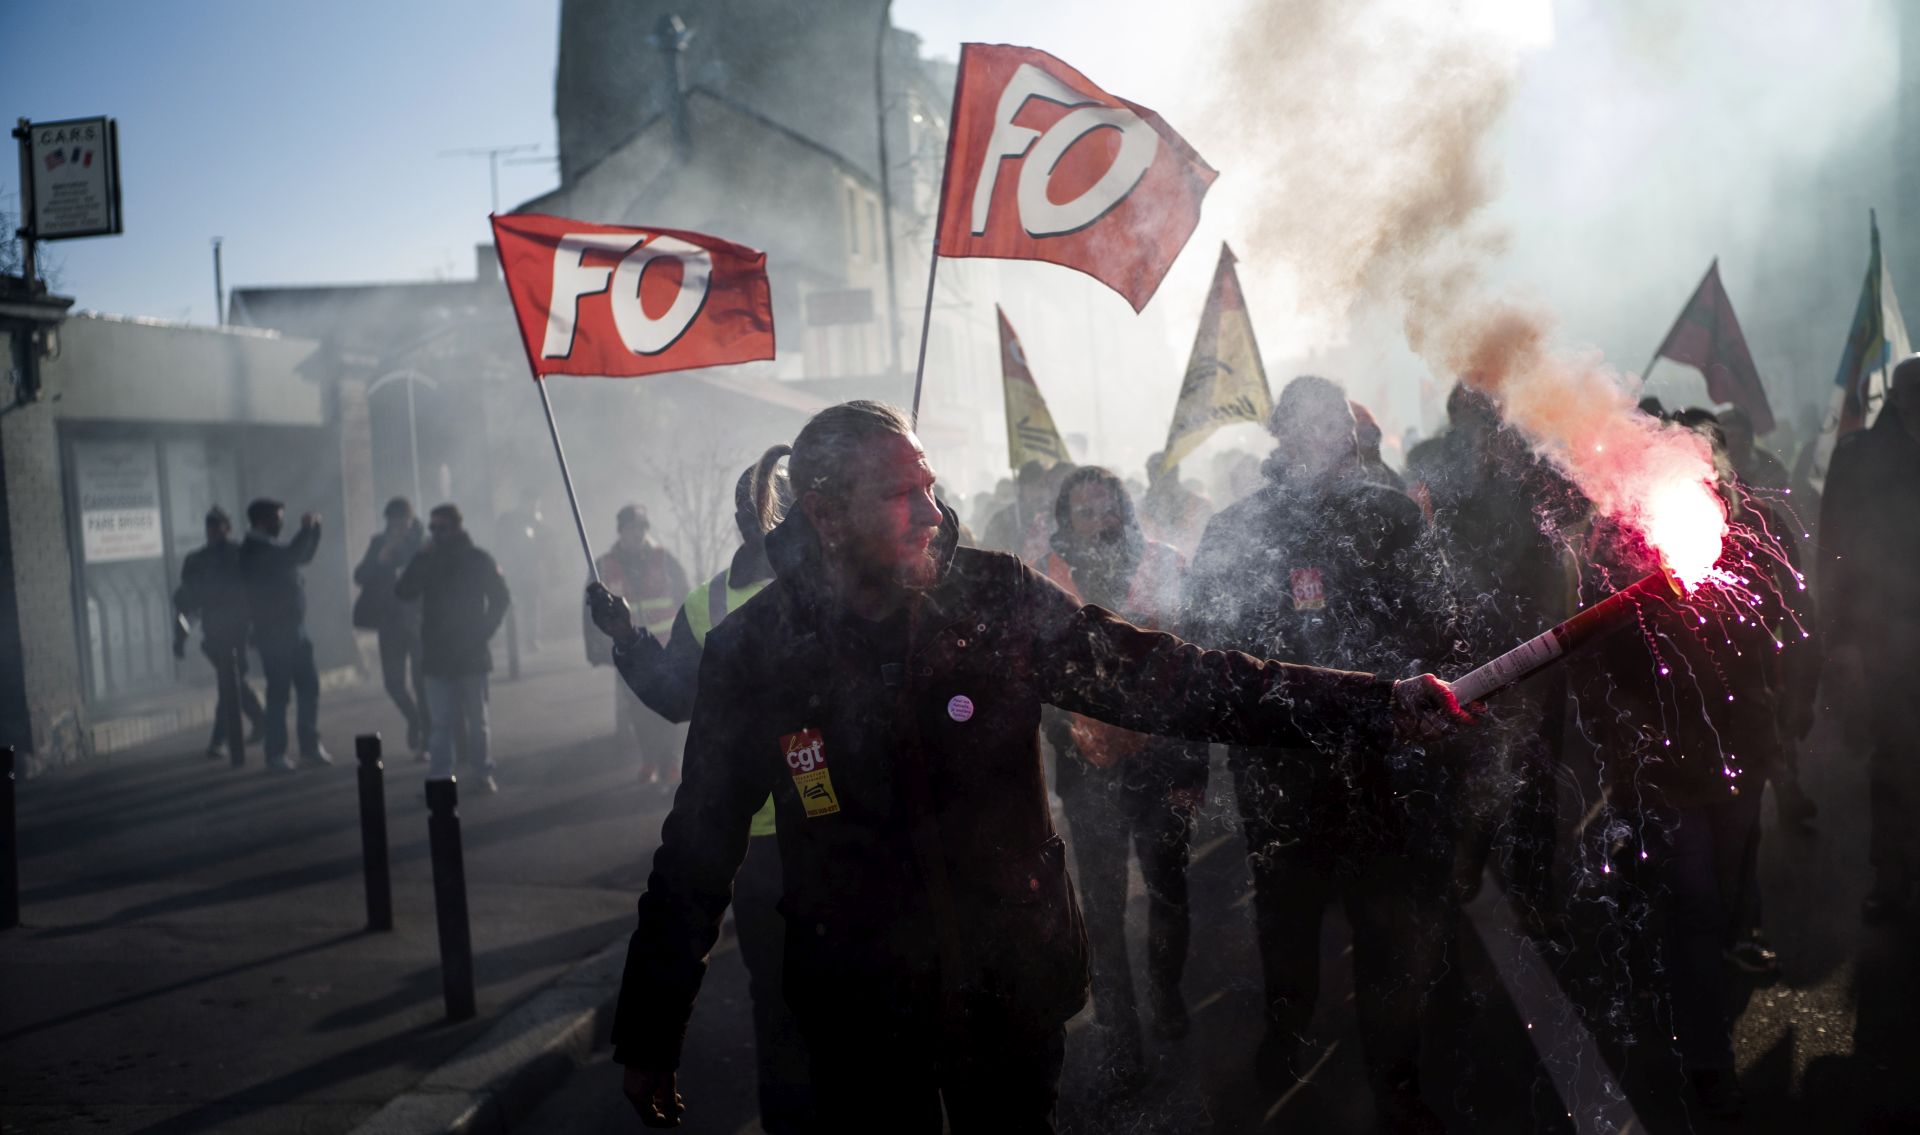 epa08144348 Protesters participate in a demonstration against pension reforms in Versailles, outside Paris, France, 27 February 2019. Unions representing railway and transport workers and many others in the public sector keep protesting against French government's reform of the pension system, as President Macron meets with businessmen during the Choose France summit in Versailles.  EPA/YOAN VALAT